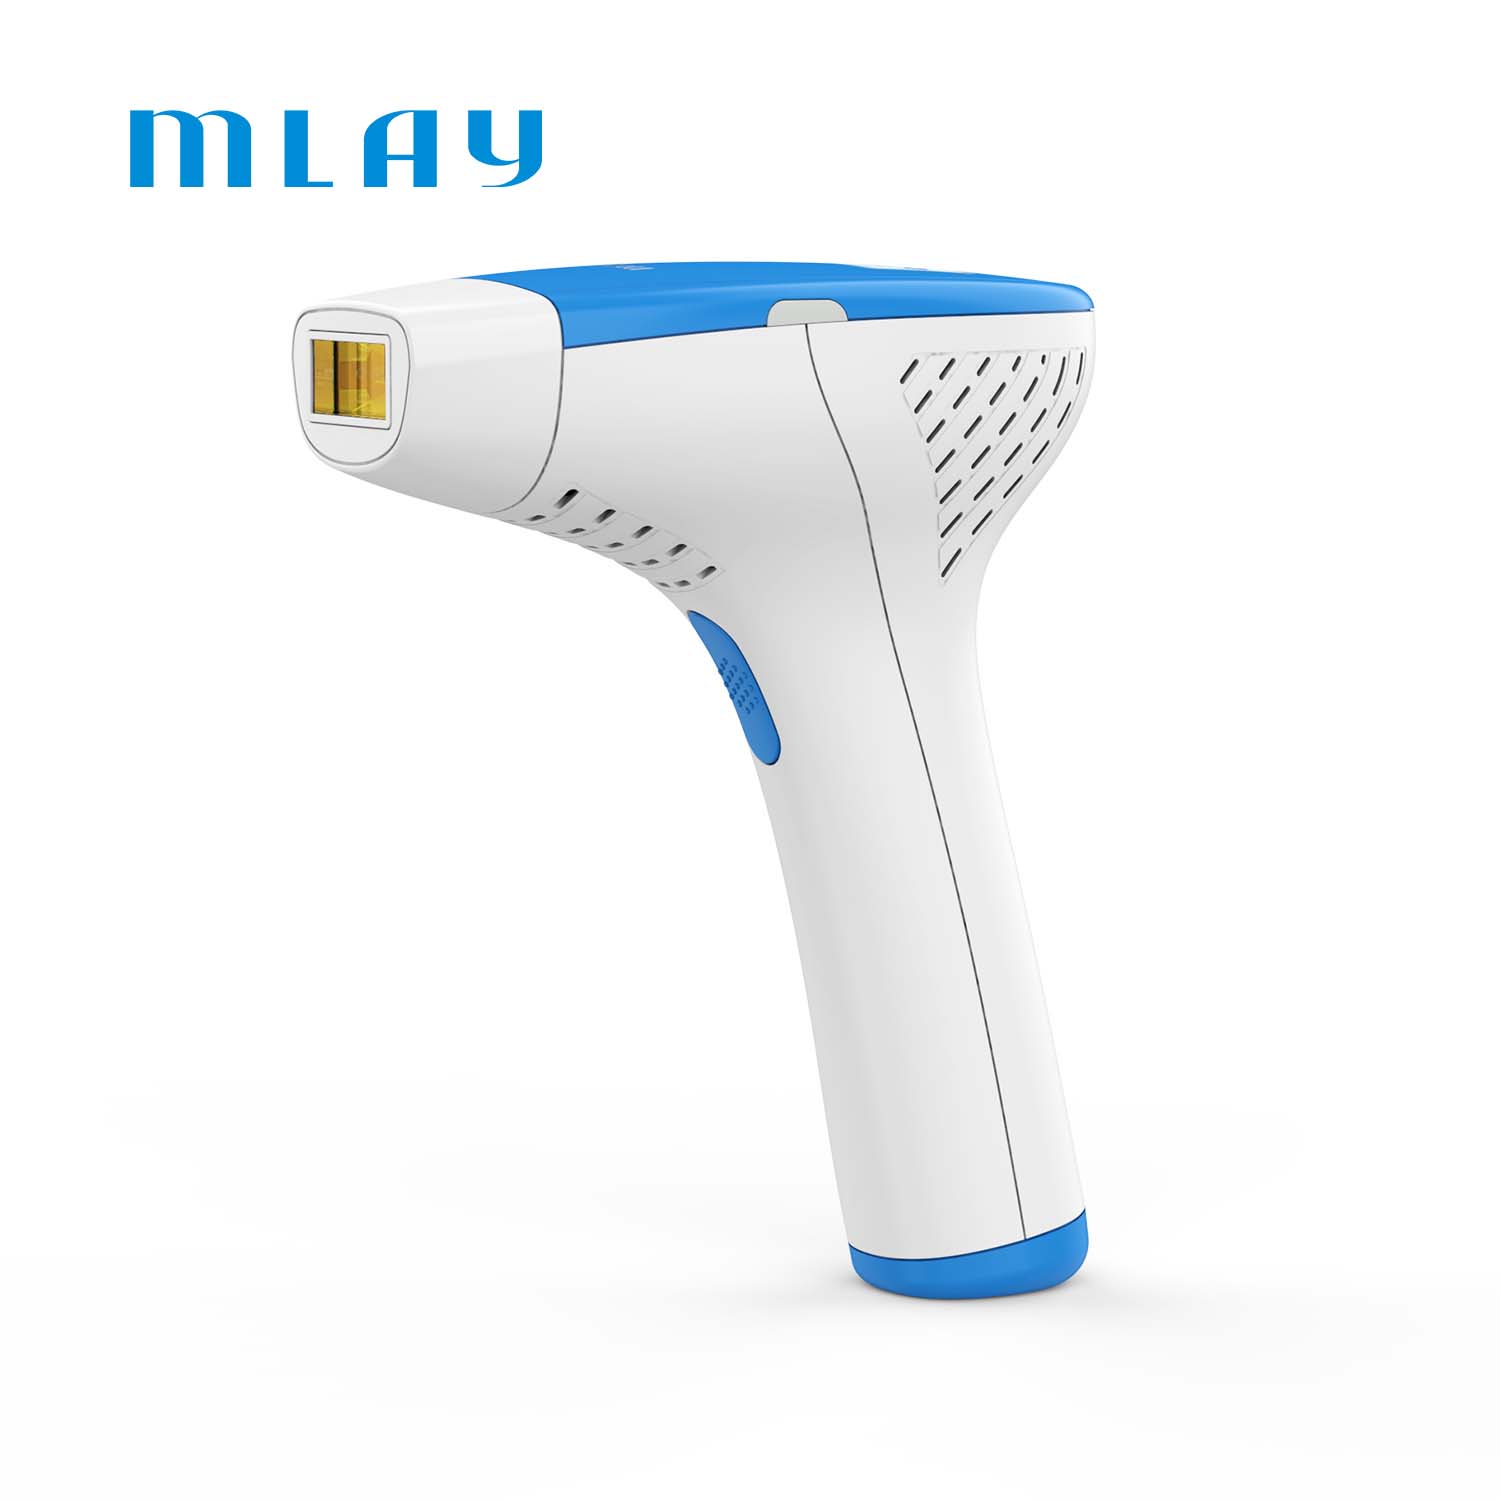 Hair Removal Device Laser IPL Hair Removal MLAY M3 3 Functions Ipl Hair Removal